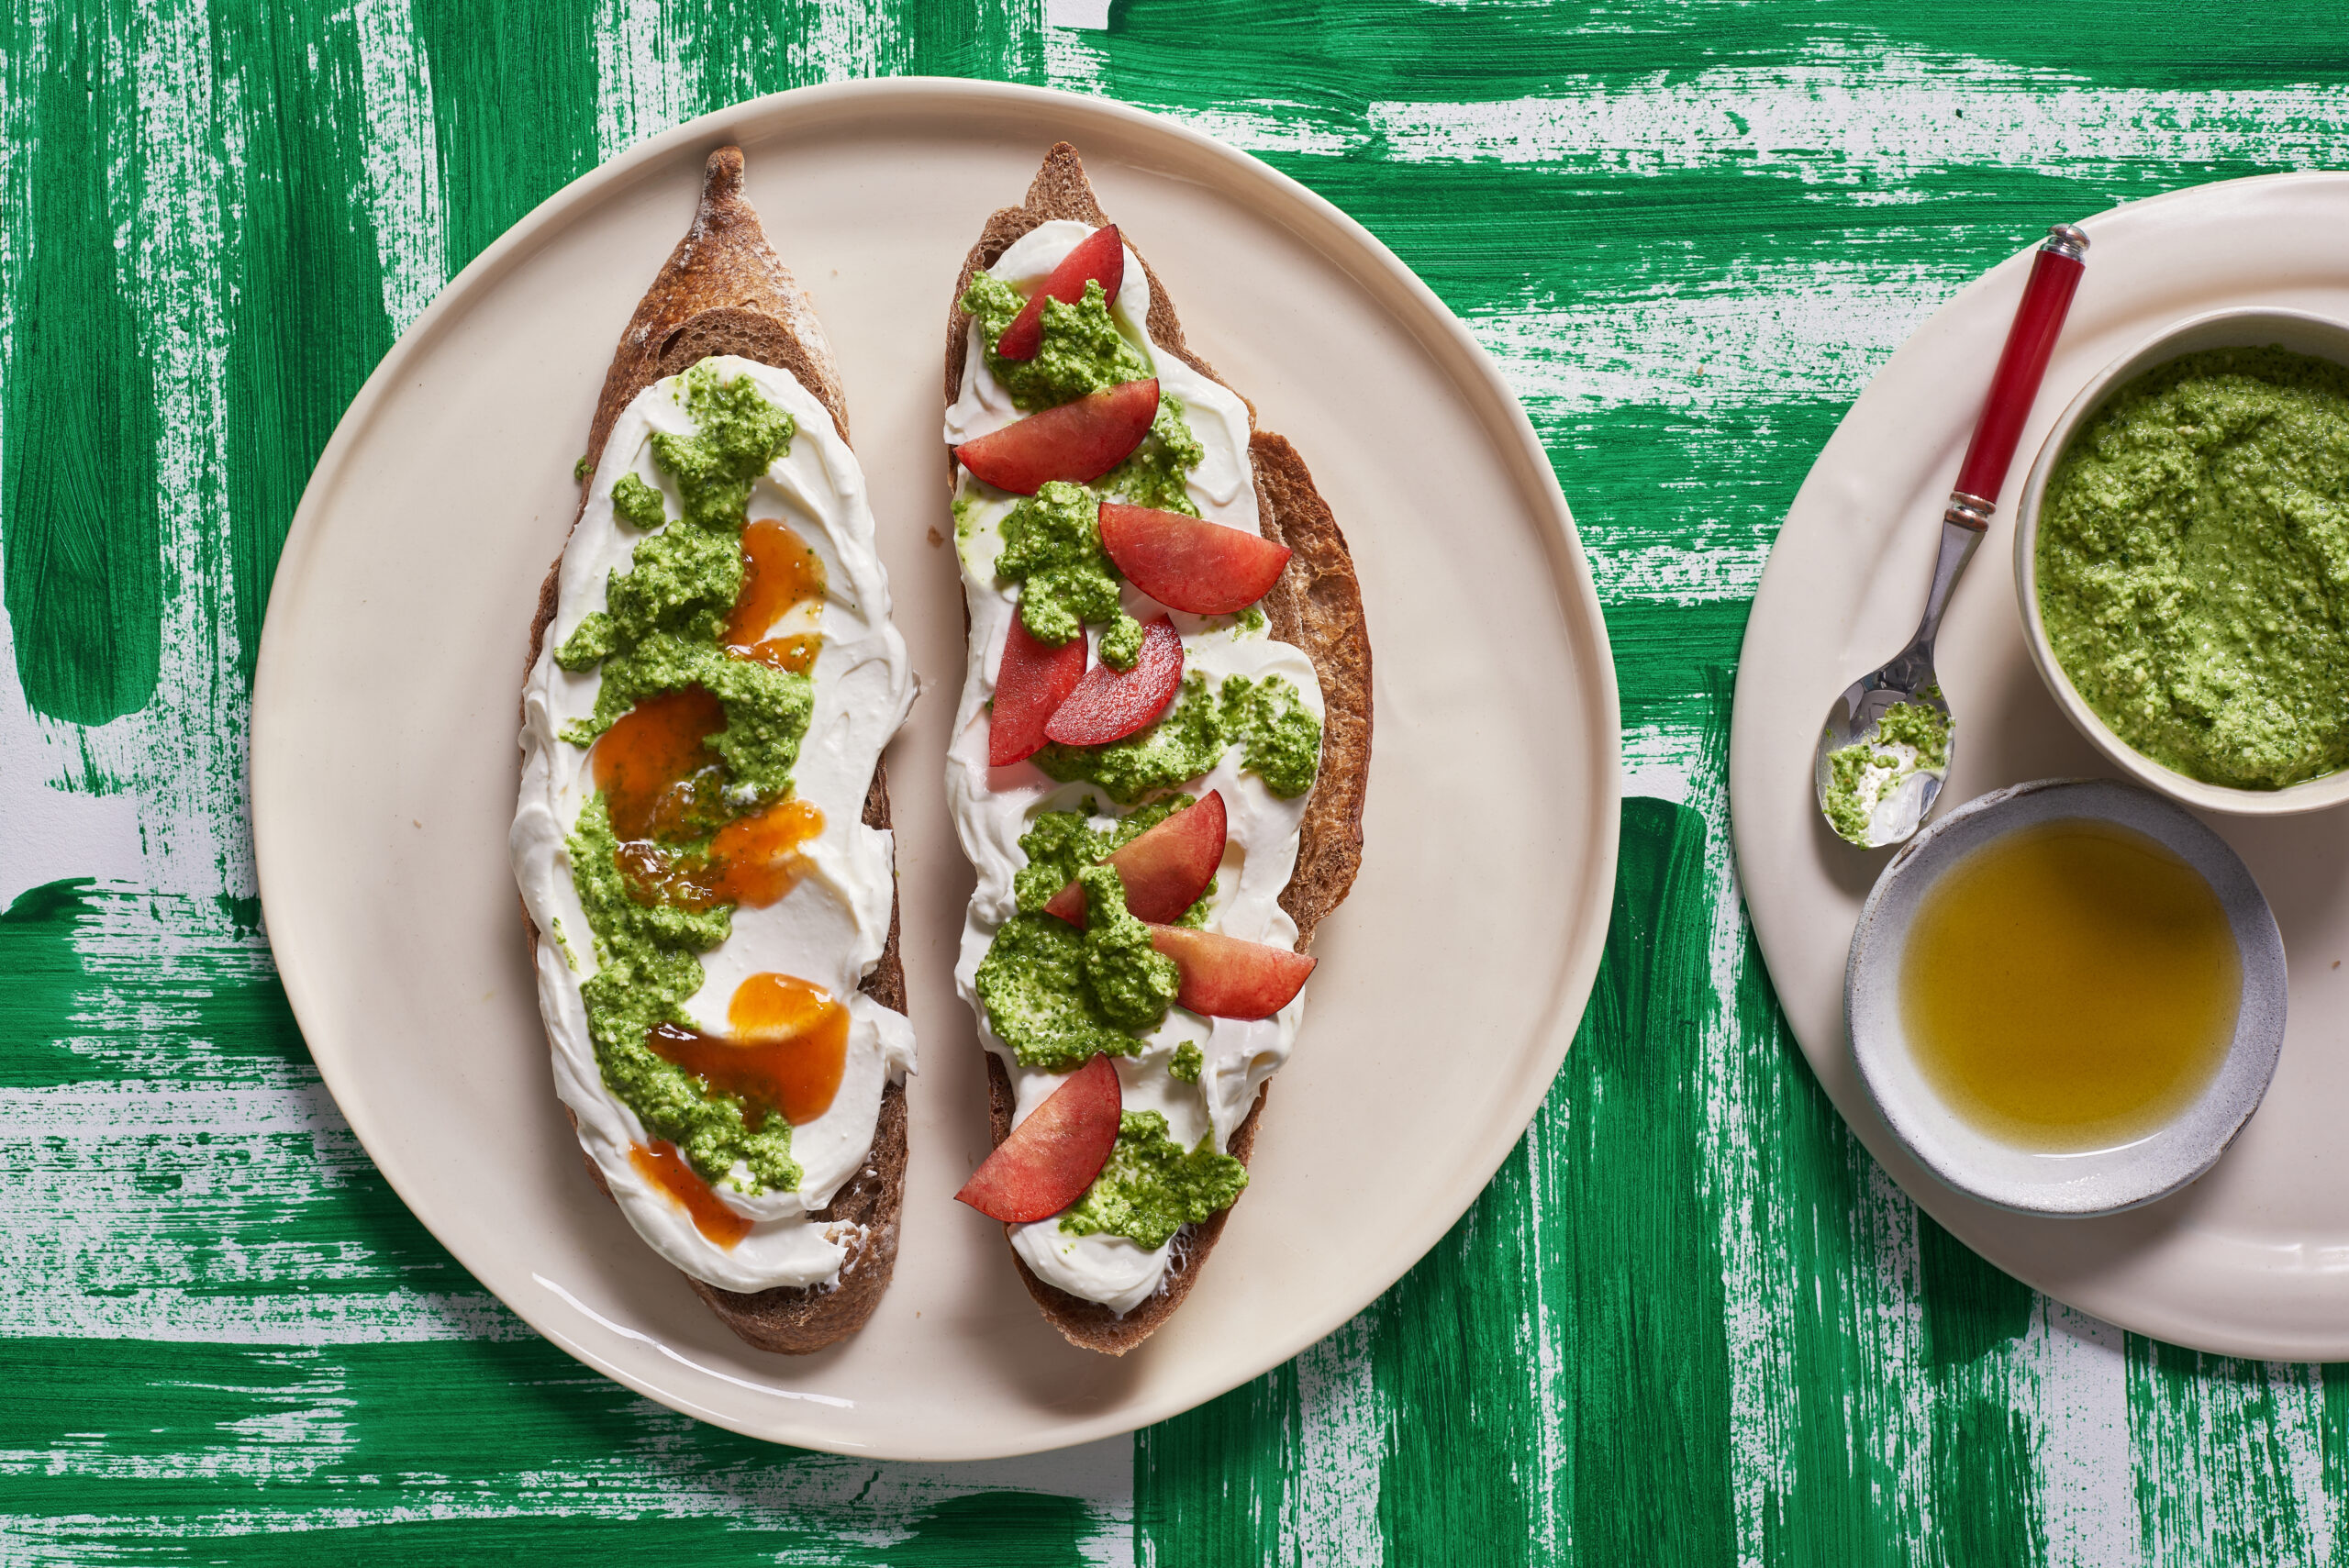 Toast with almond schug and labneh